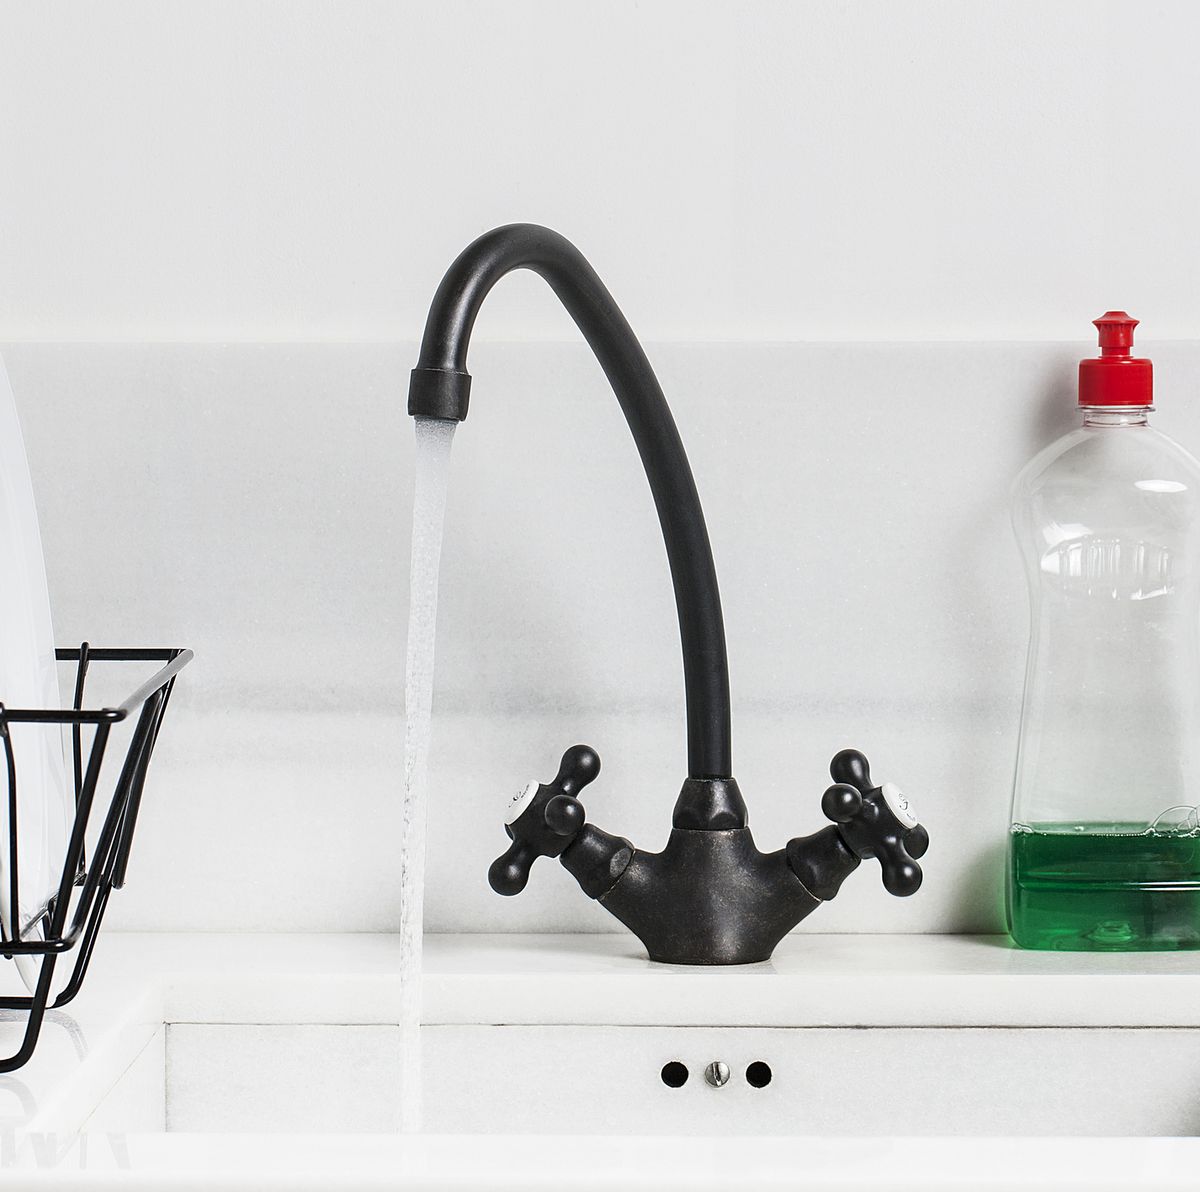 Clean your kitchen mixer tap: Tips that really work